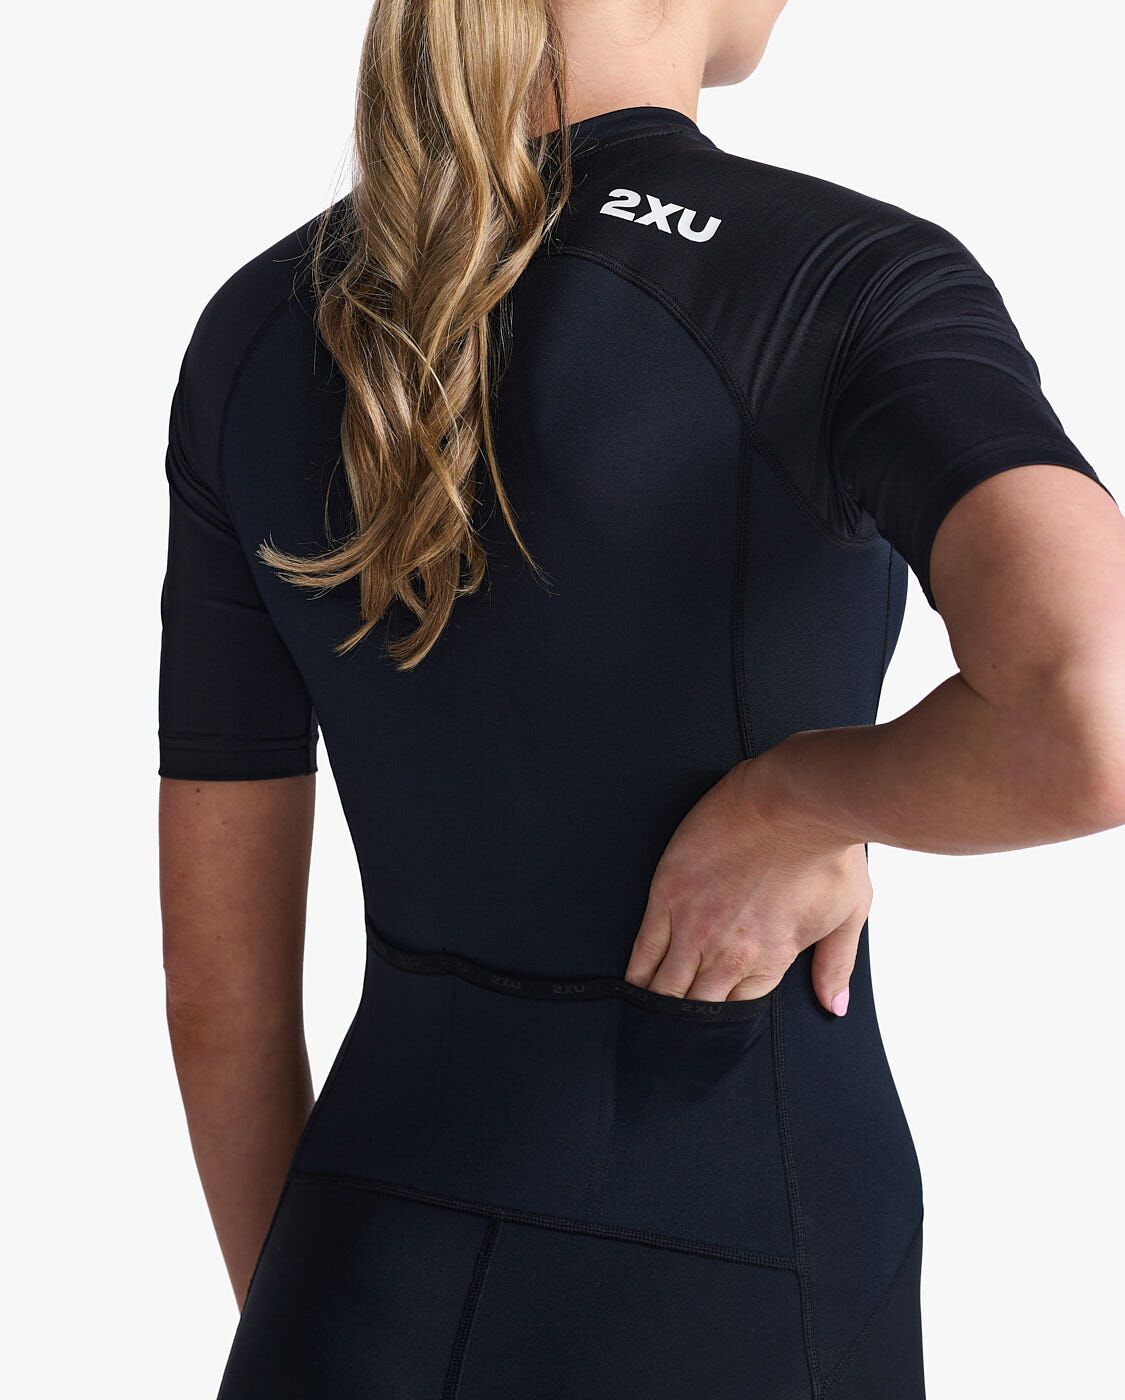 2XU South Africa - Womens Core Sleeved Trisuit - BLK/WHT